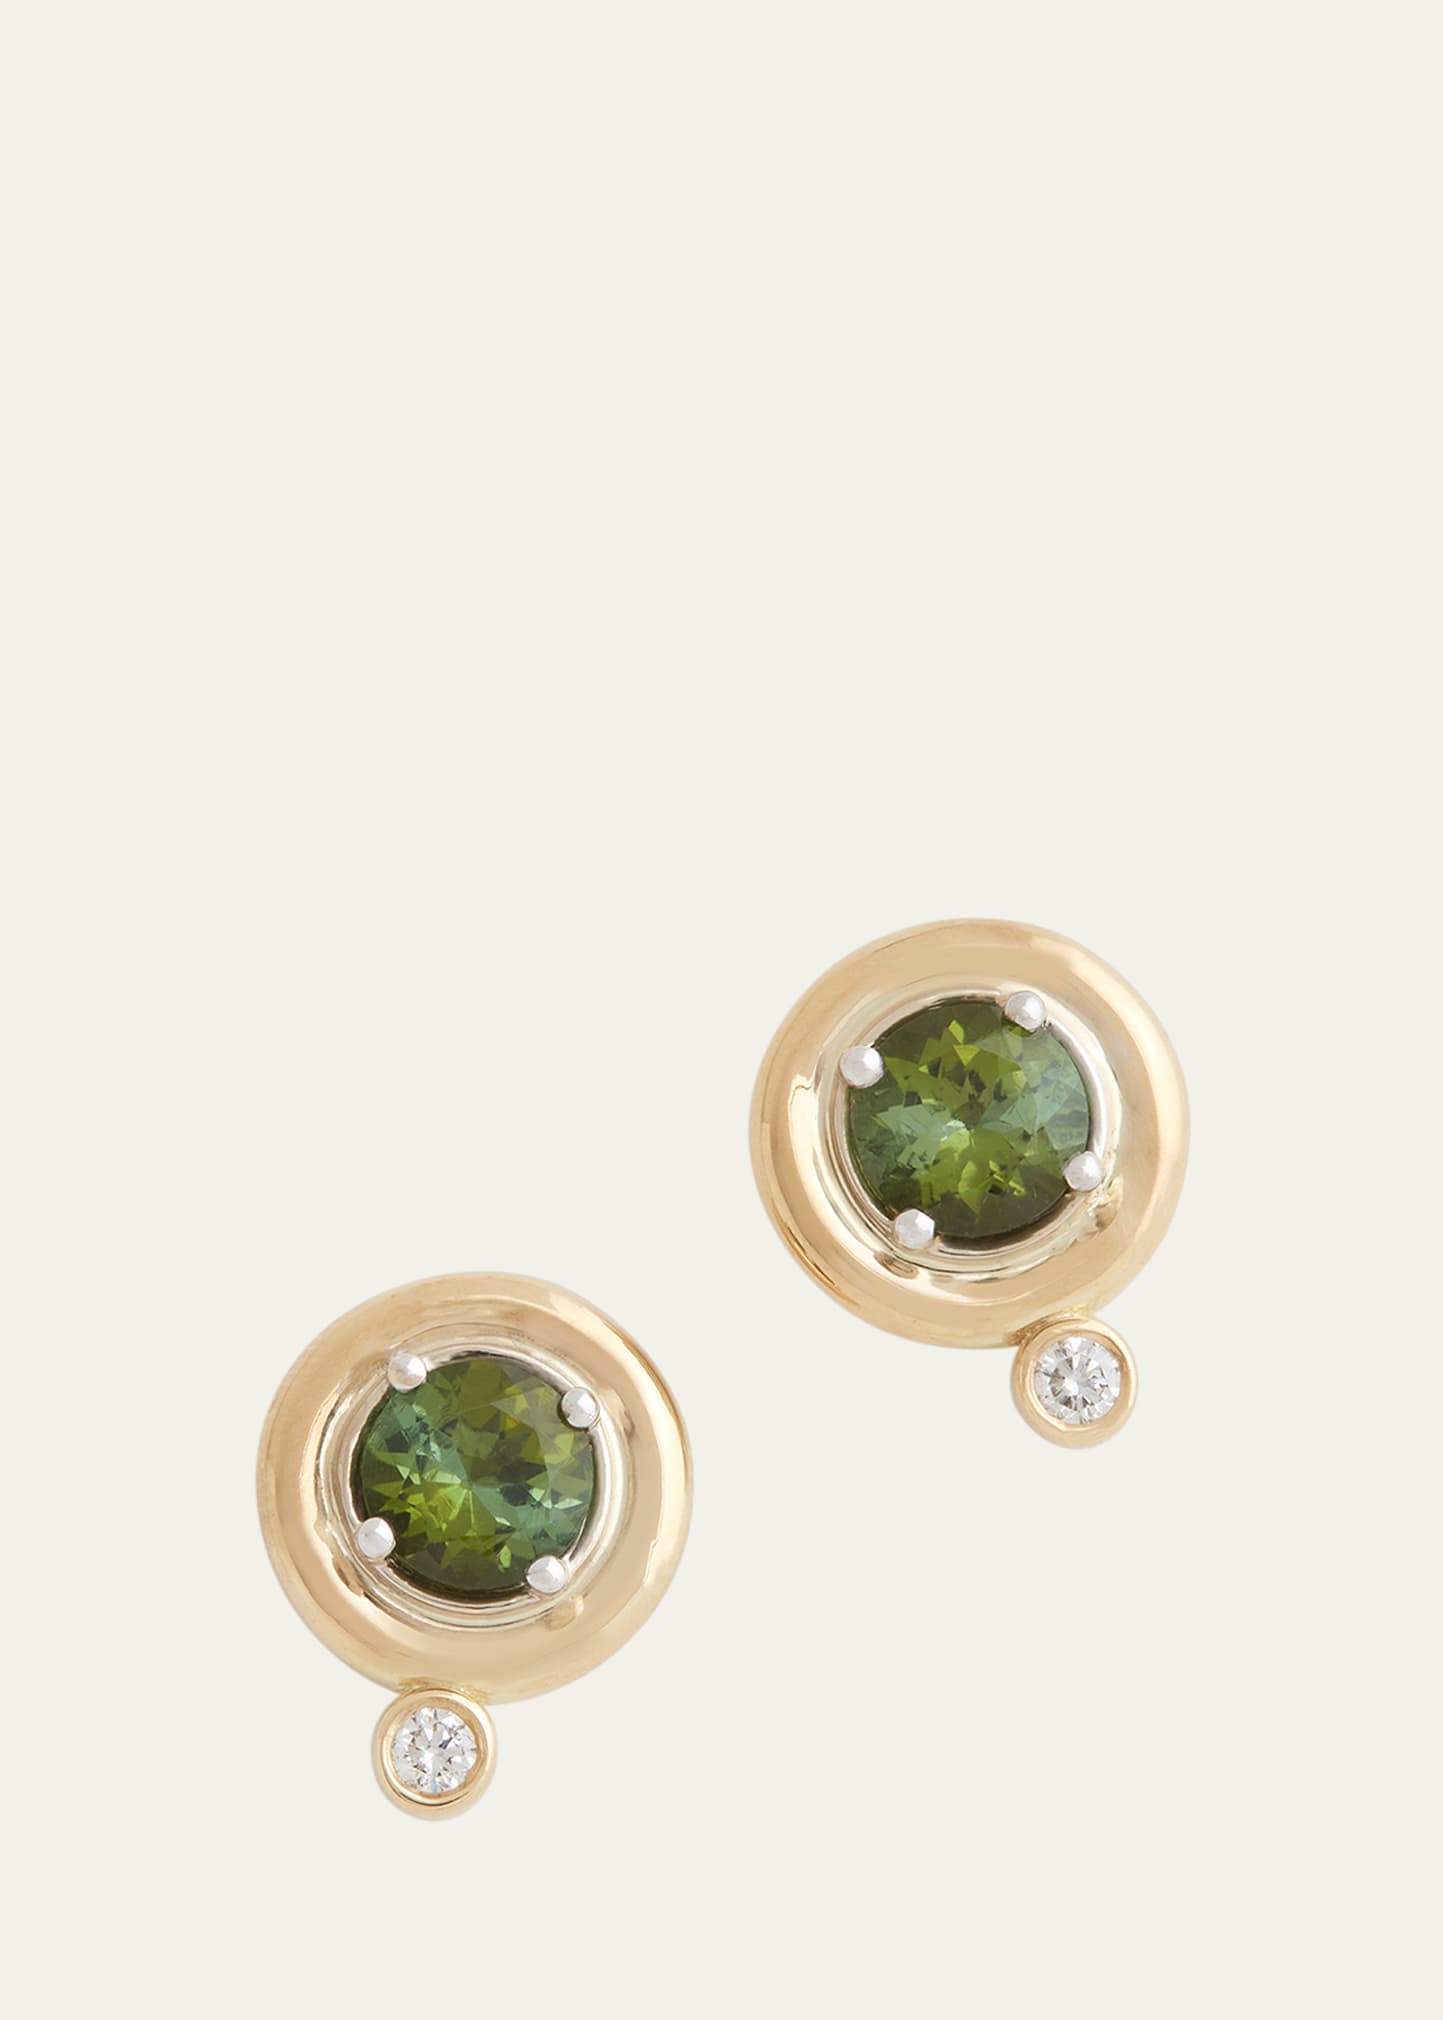 18K Yellow and White Gold Round Stud Earrings with Green Tourmaline and Diamonds